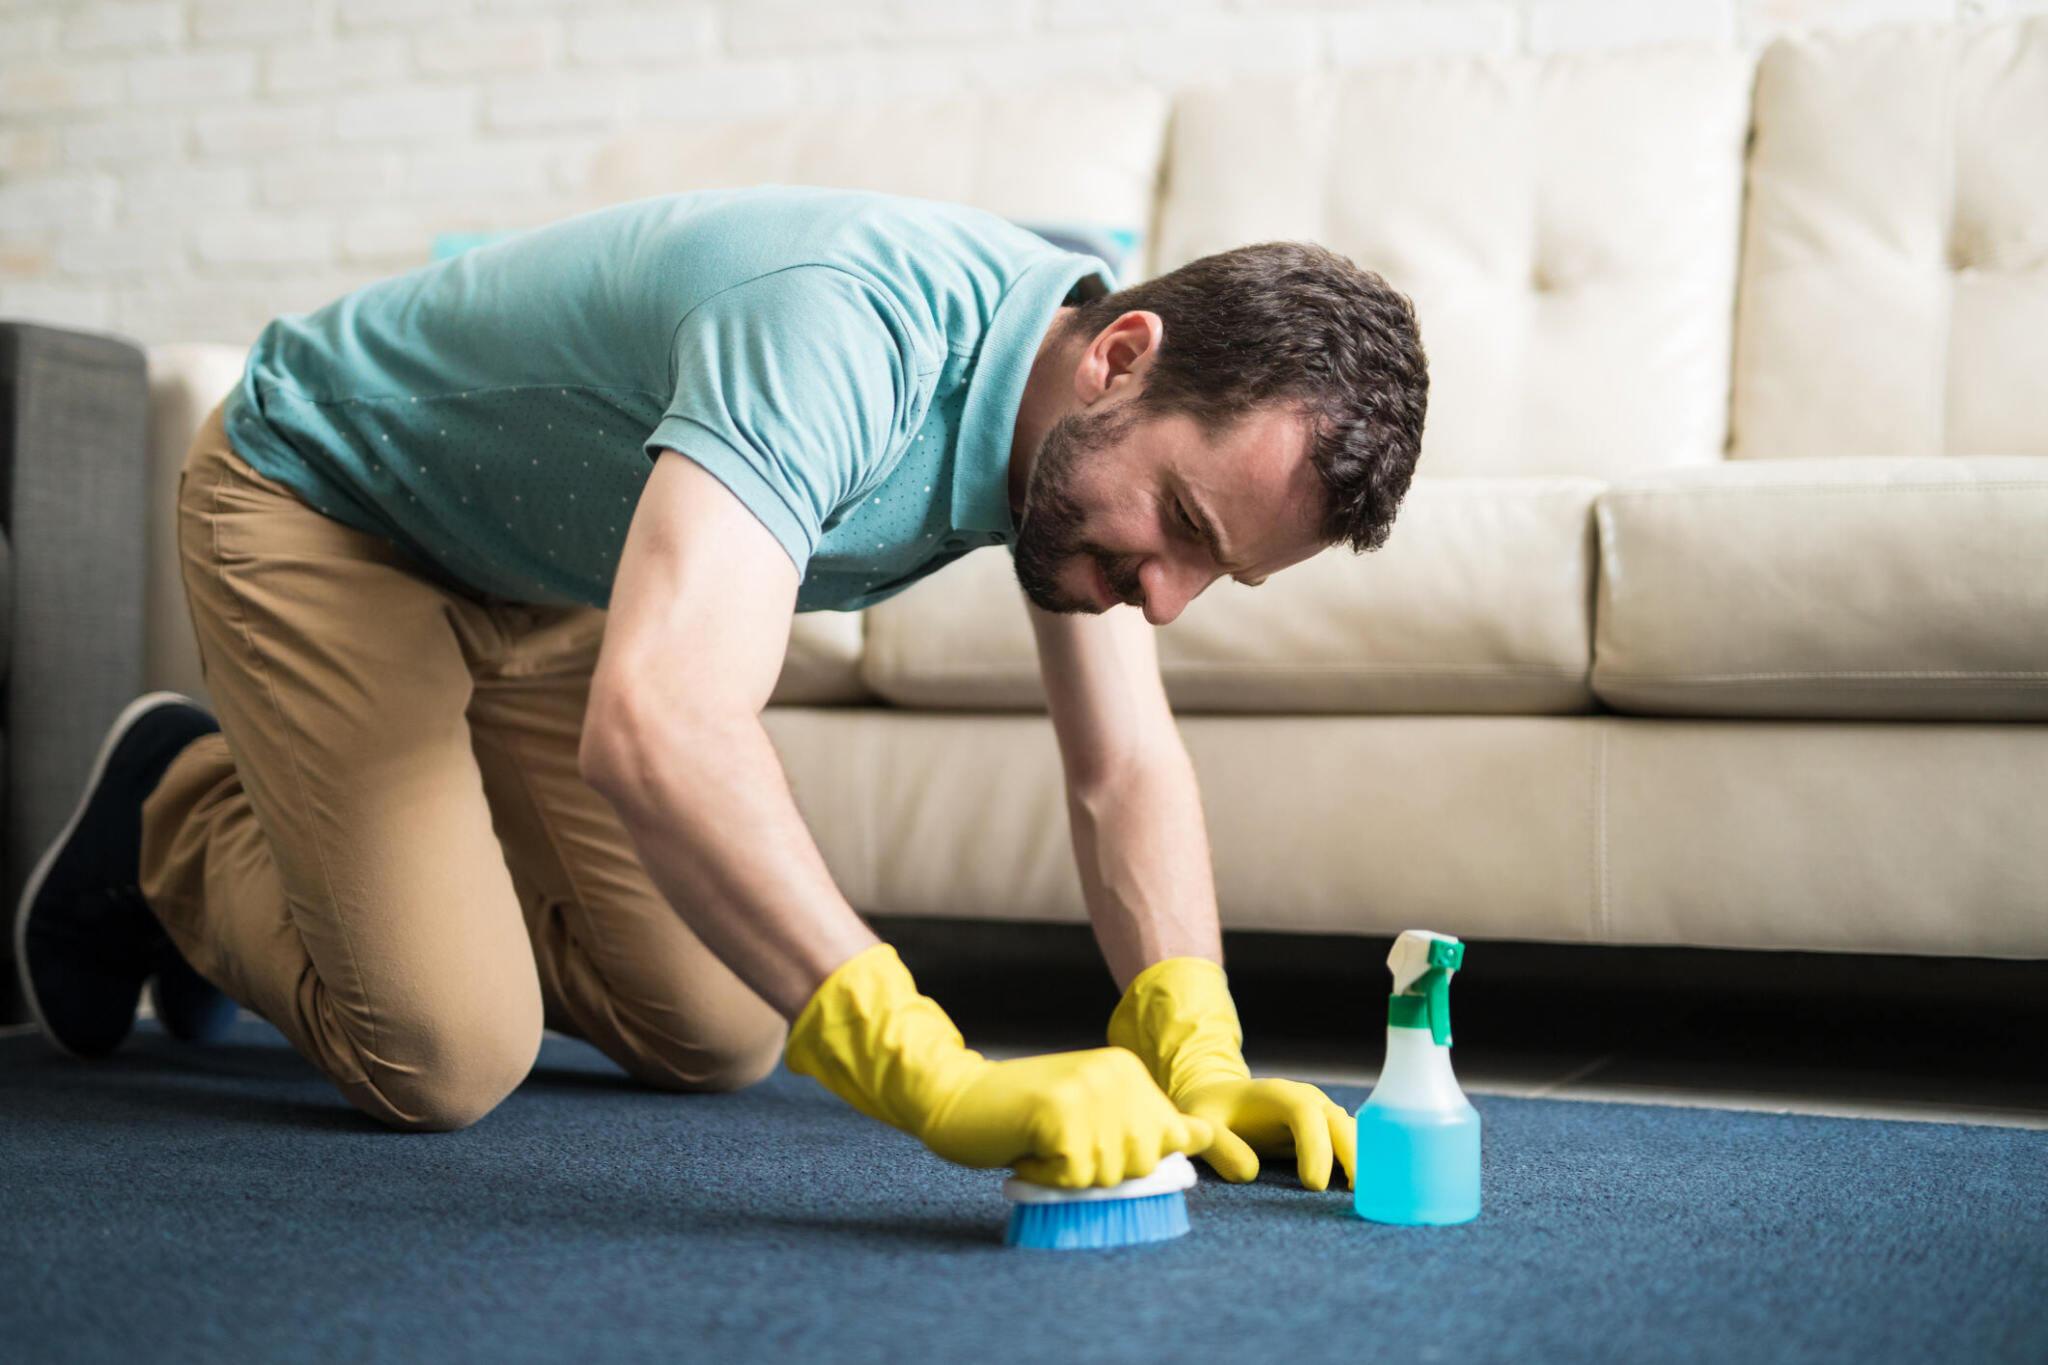 Which Method of Carpet Cleaning is Best?